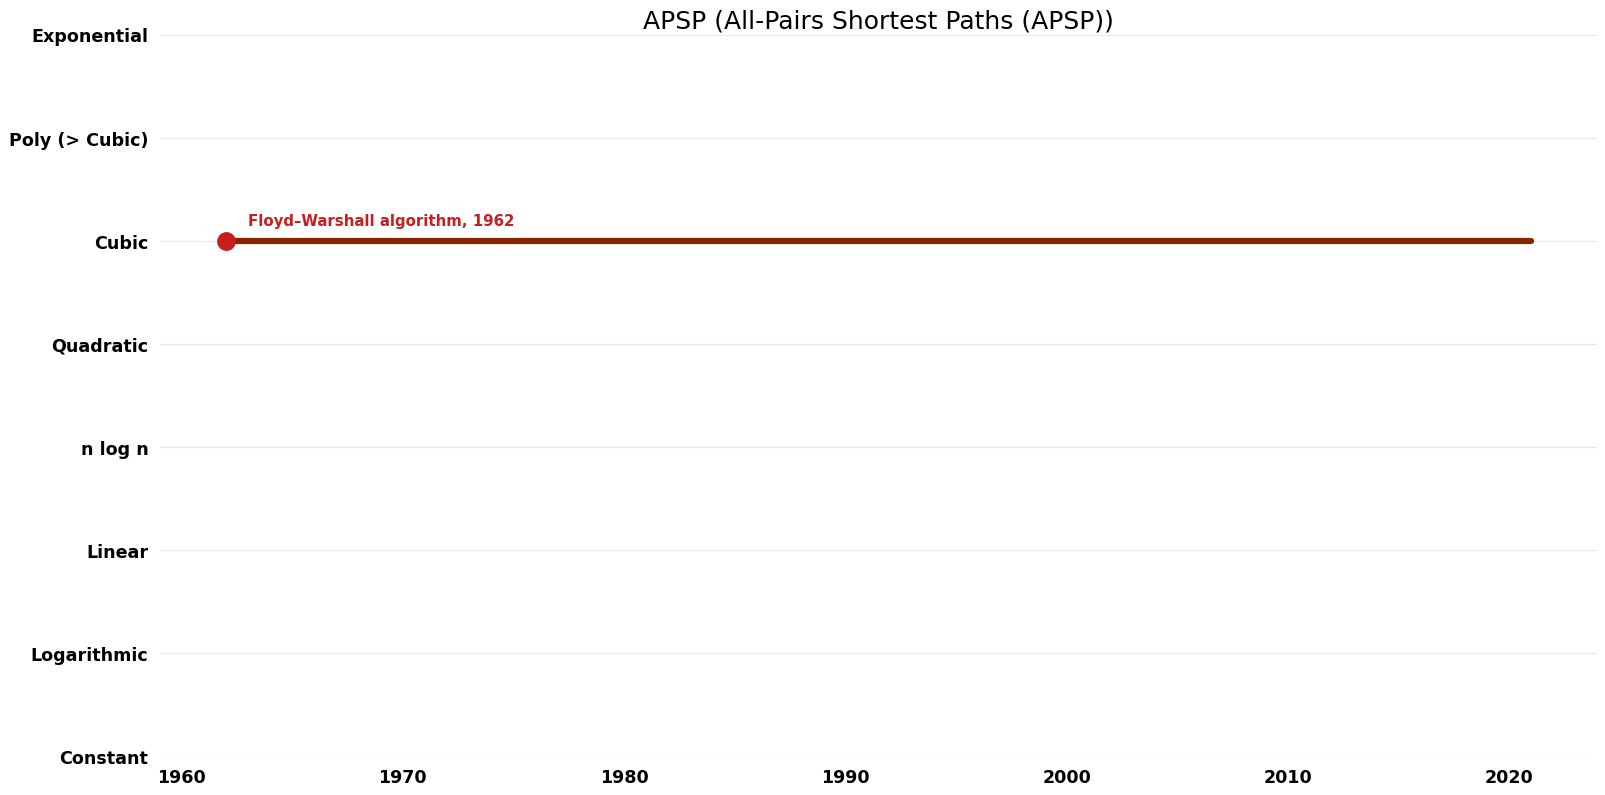 File:All-Pairs Shortest Paths (APSP) - APSP - Time.png